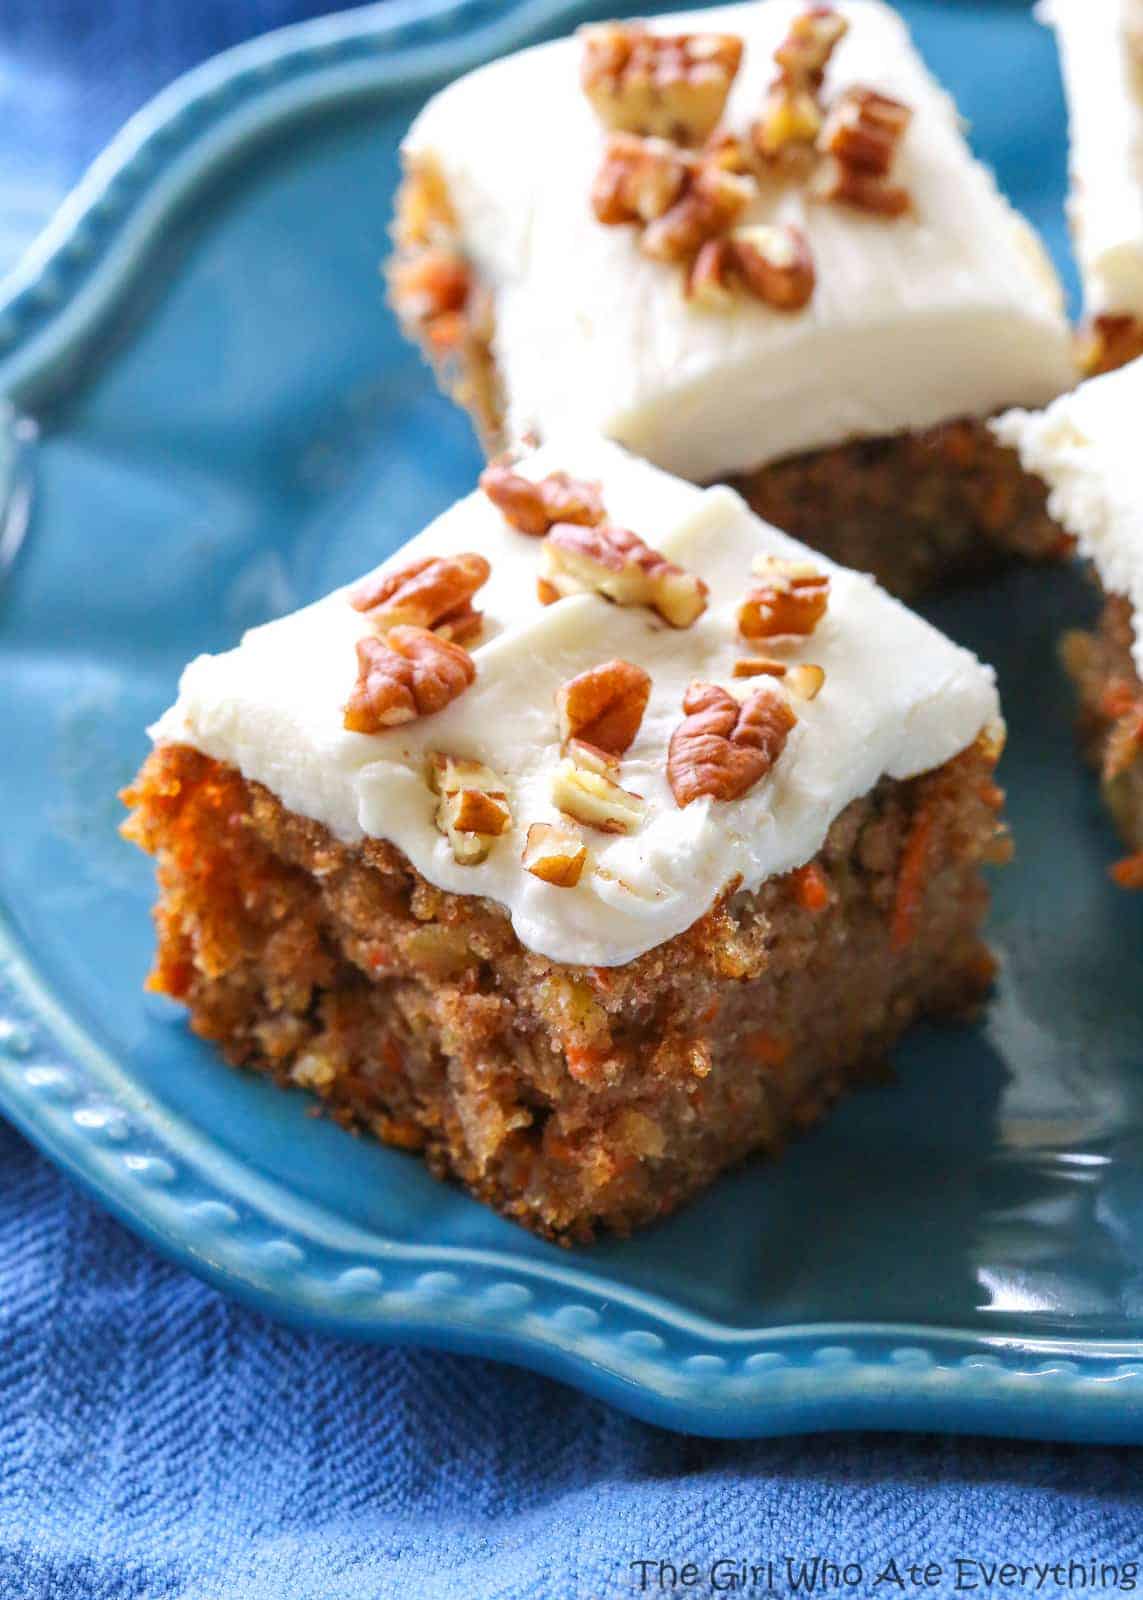 Carrot Walnut Cake with Cream Cheese - Beth Twice Cakes and Pastries